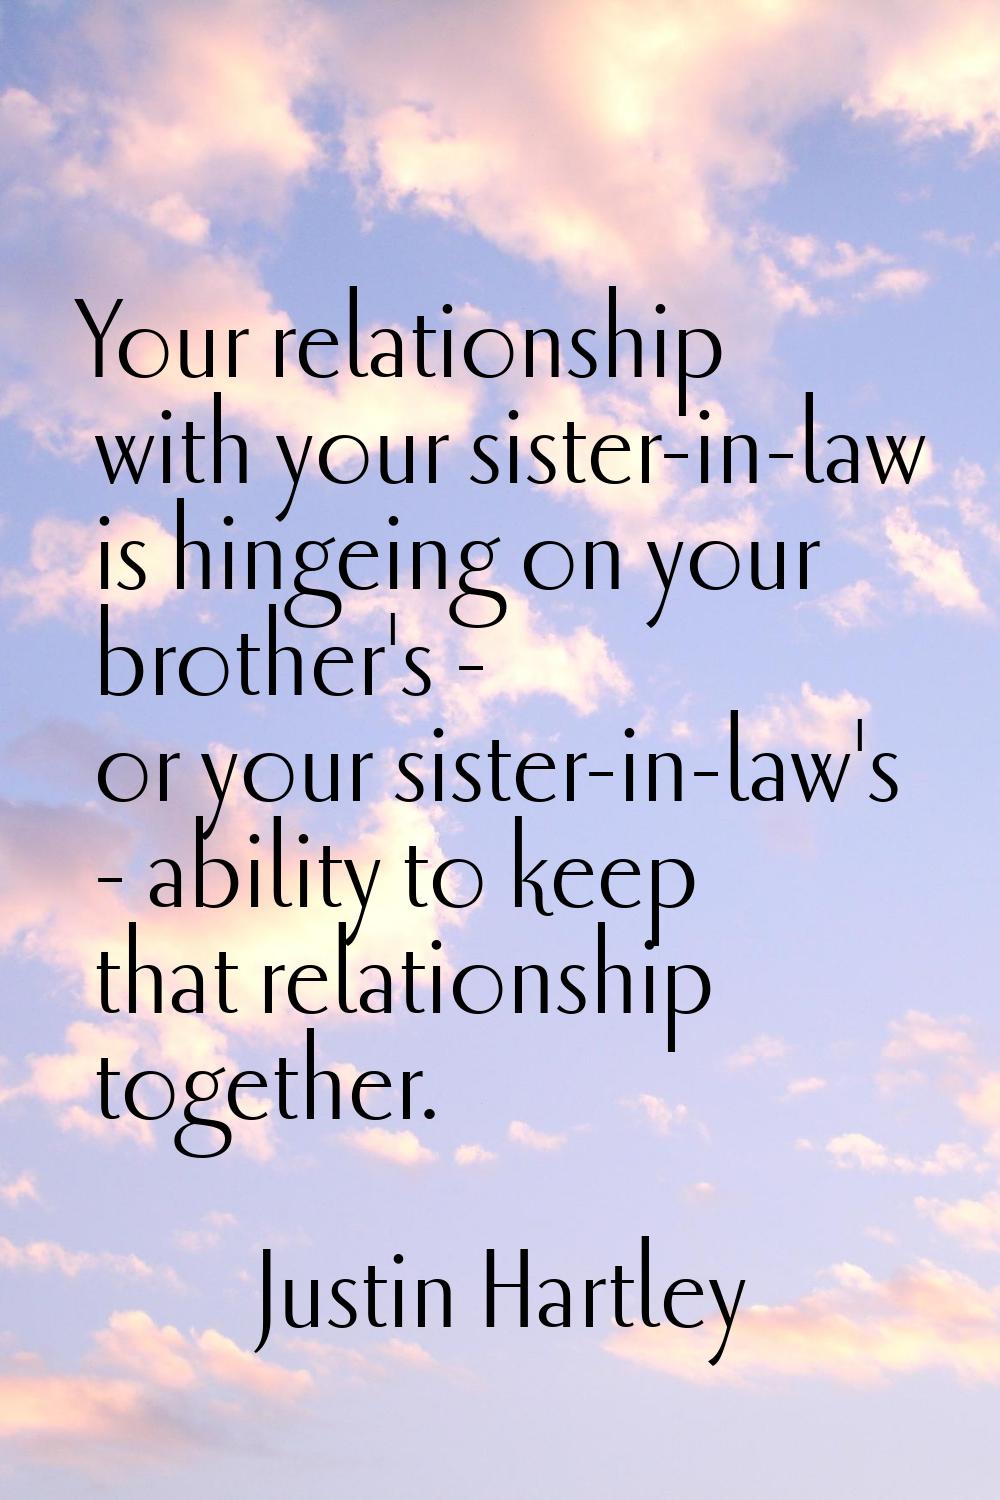 Your relationship with your sister-in-law is hingeing on your brother's - or your sister-in-law's -